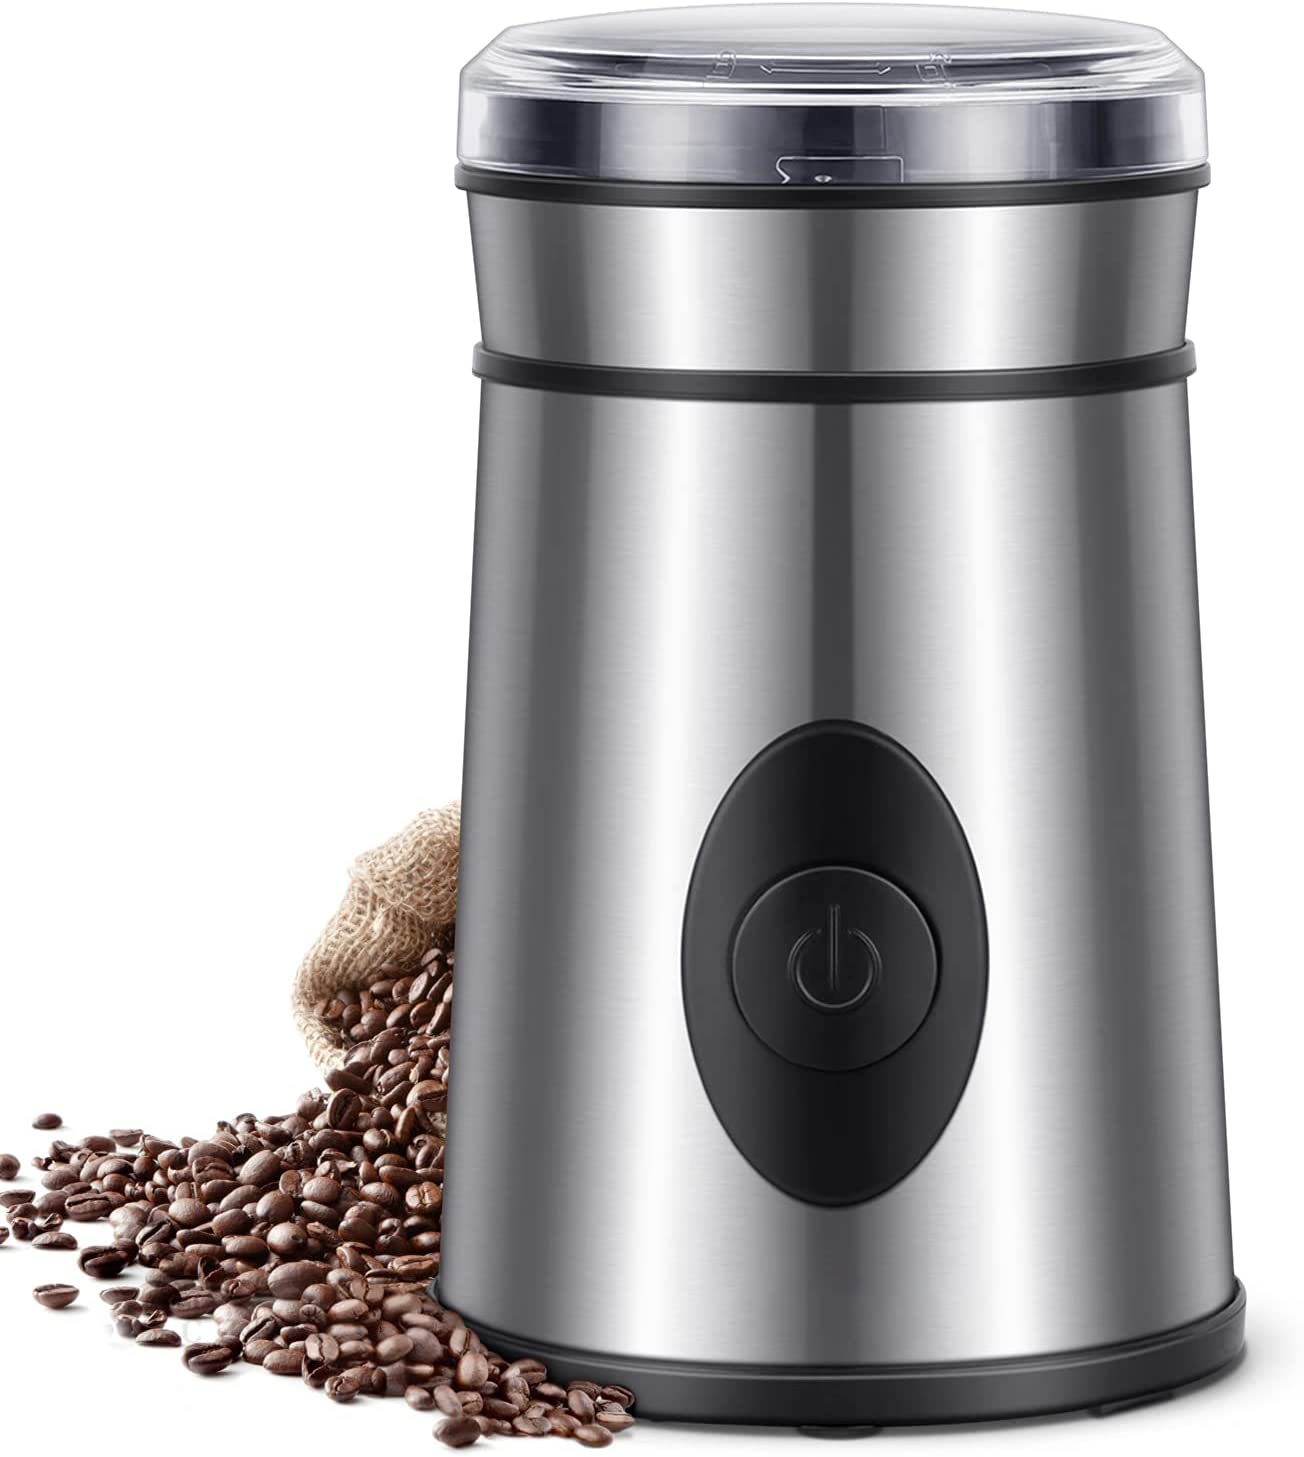 ELEHOT-Store Coffee Grinder Electric Coffee Grinder with Stainless Steel Impact Knife for Coffee Beans Nuts Spices Capacity 50 g (200 W)